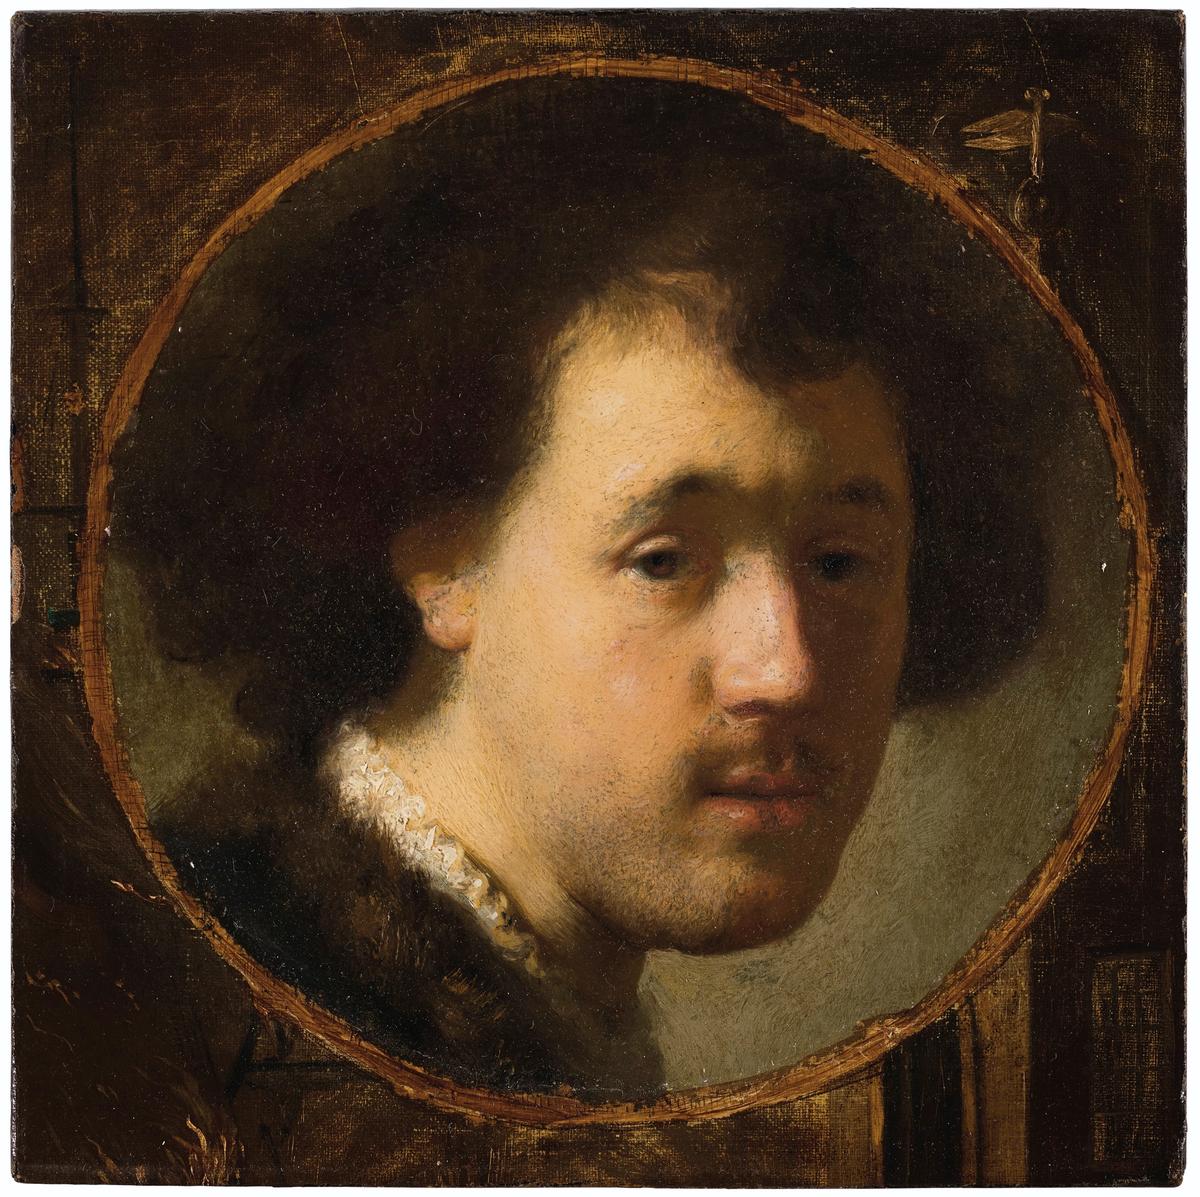 A Portrait of Rembrandt Goes on Show. But Did He Paint It? - The New York  Times